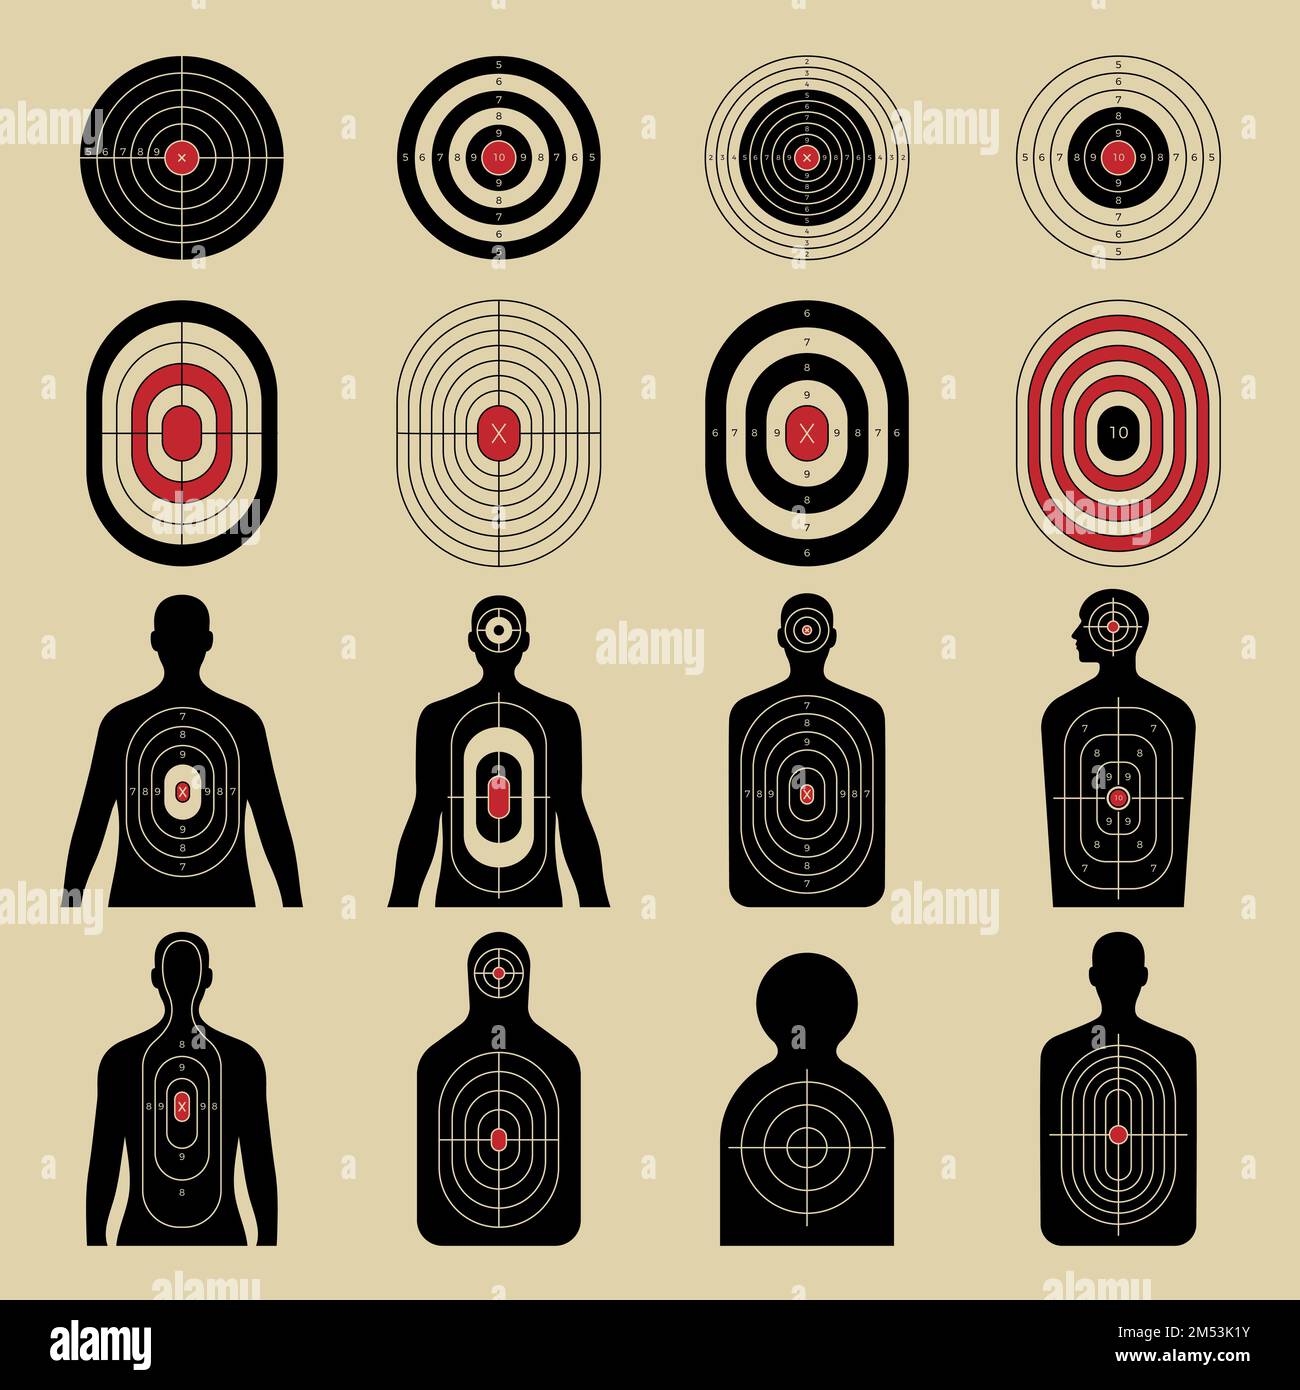 Shoot target. Geometrical forms and human silhouettes for shooting room with military weapons recent vector targets for darts practice Stock Vector